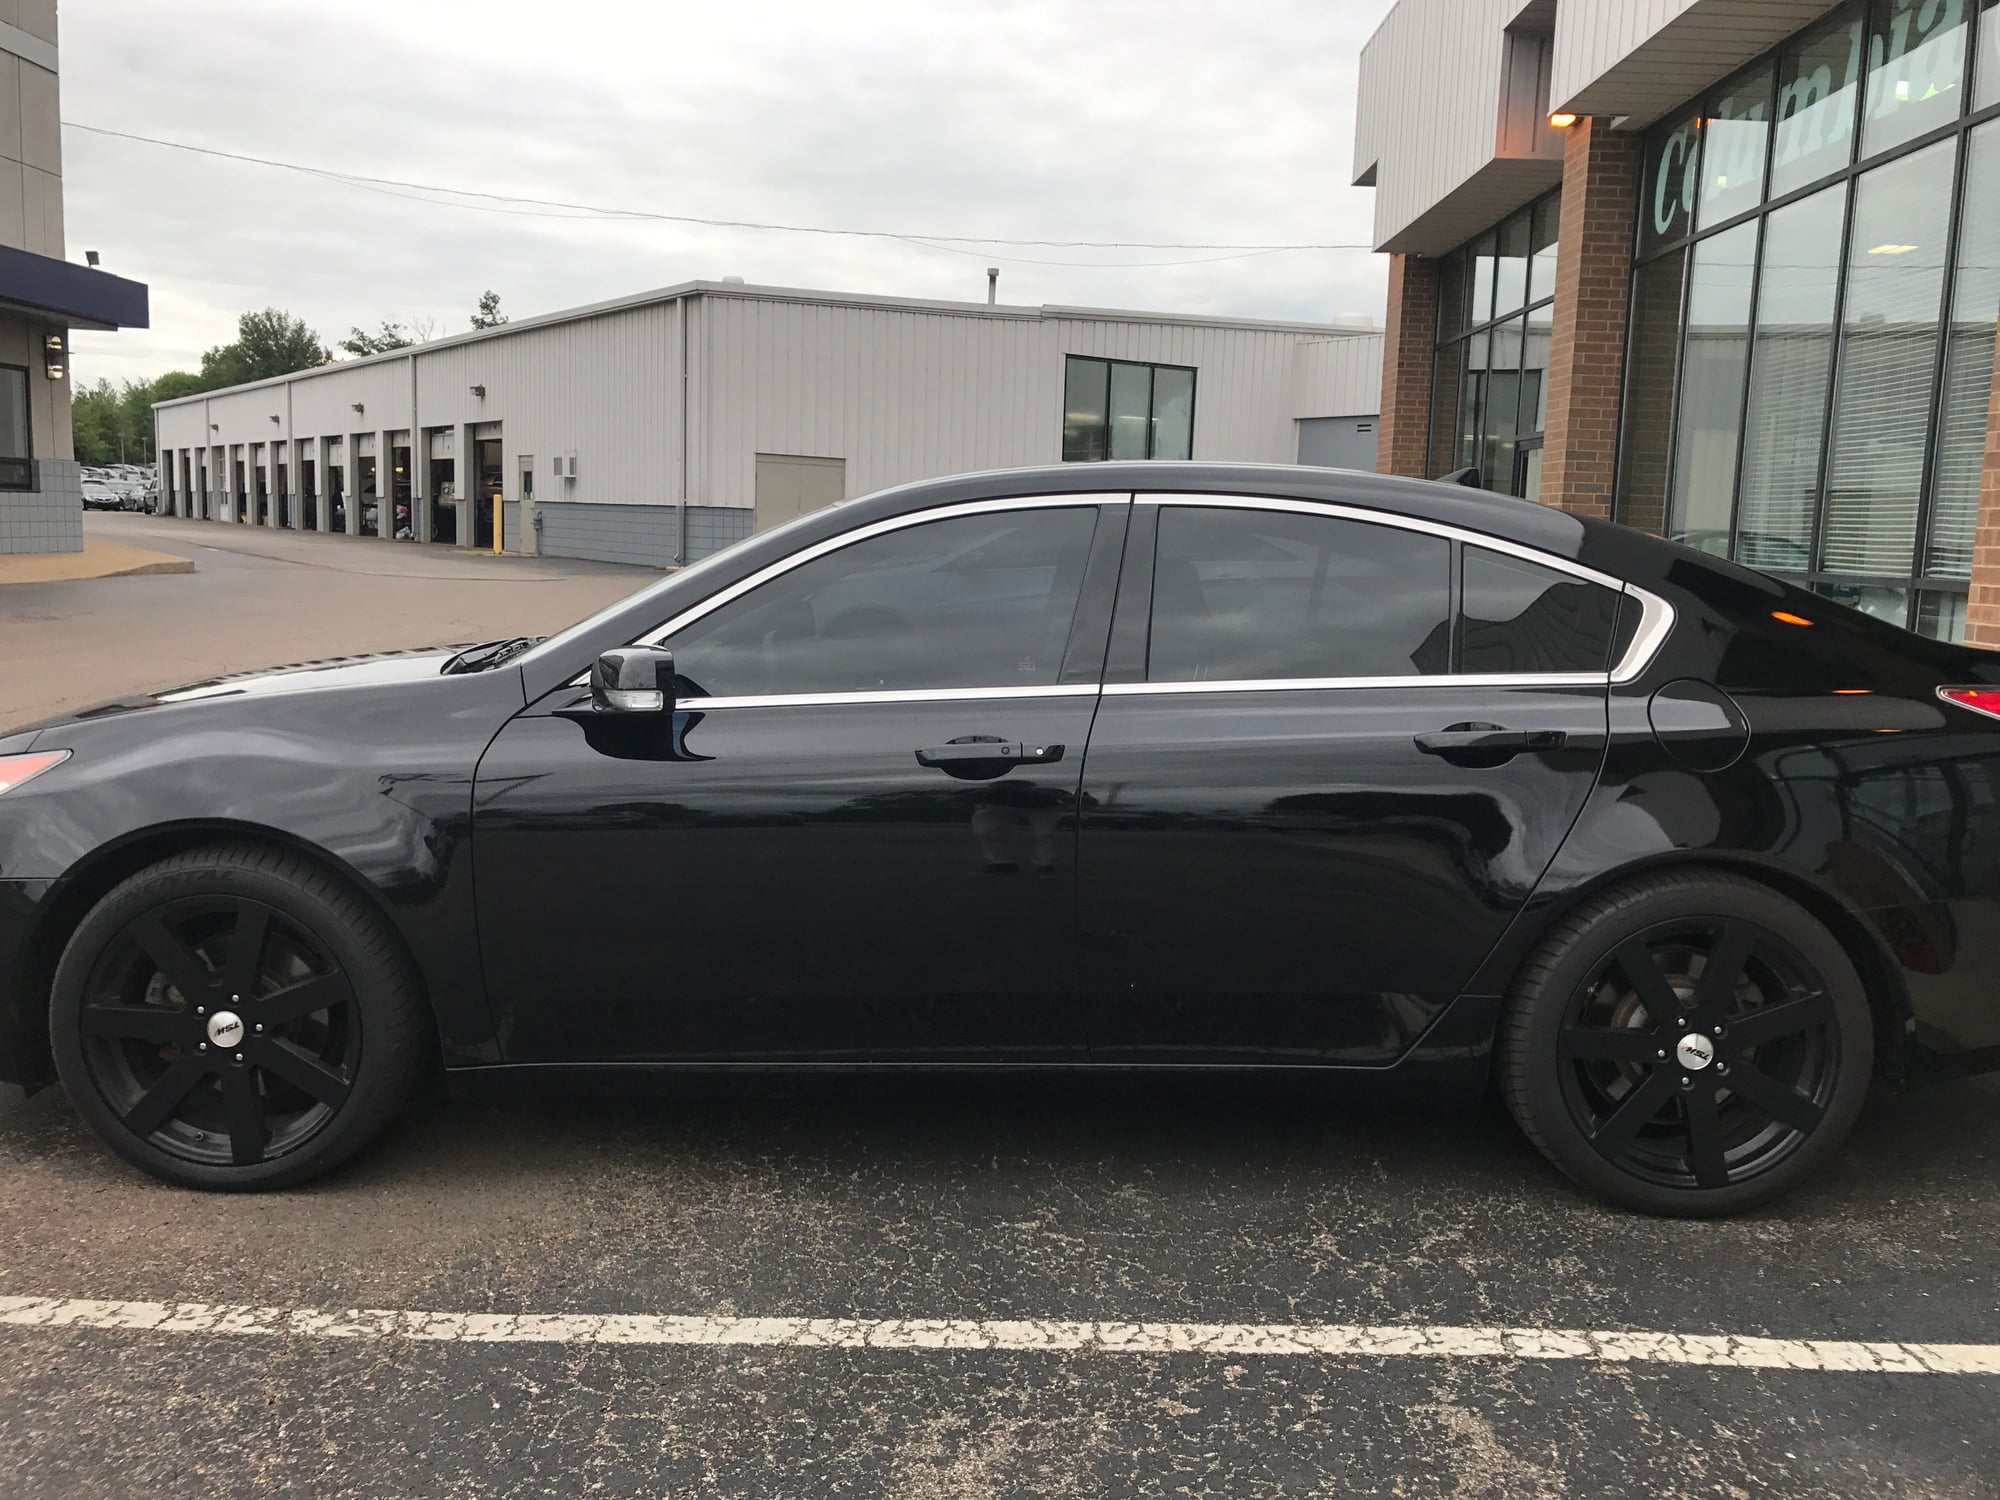 Wheels and Tires/Axles - FS: 19" TSW Bardo black wheels with 245 40 19 98YX Continental Extreme Contact tires - Used - 2009 to 2014 Acura TL - Cincinnati, OH 45236, United States